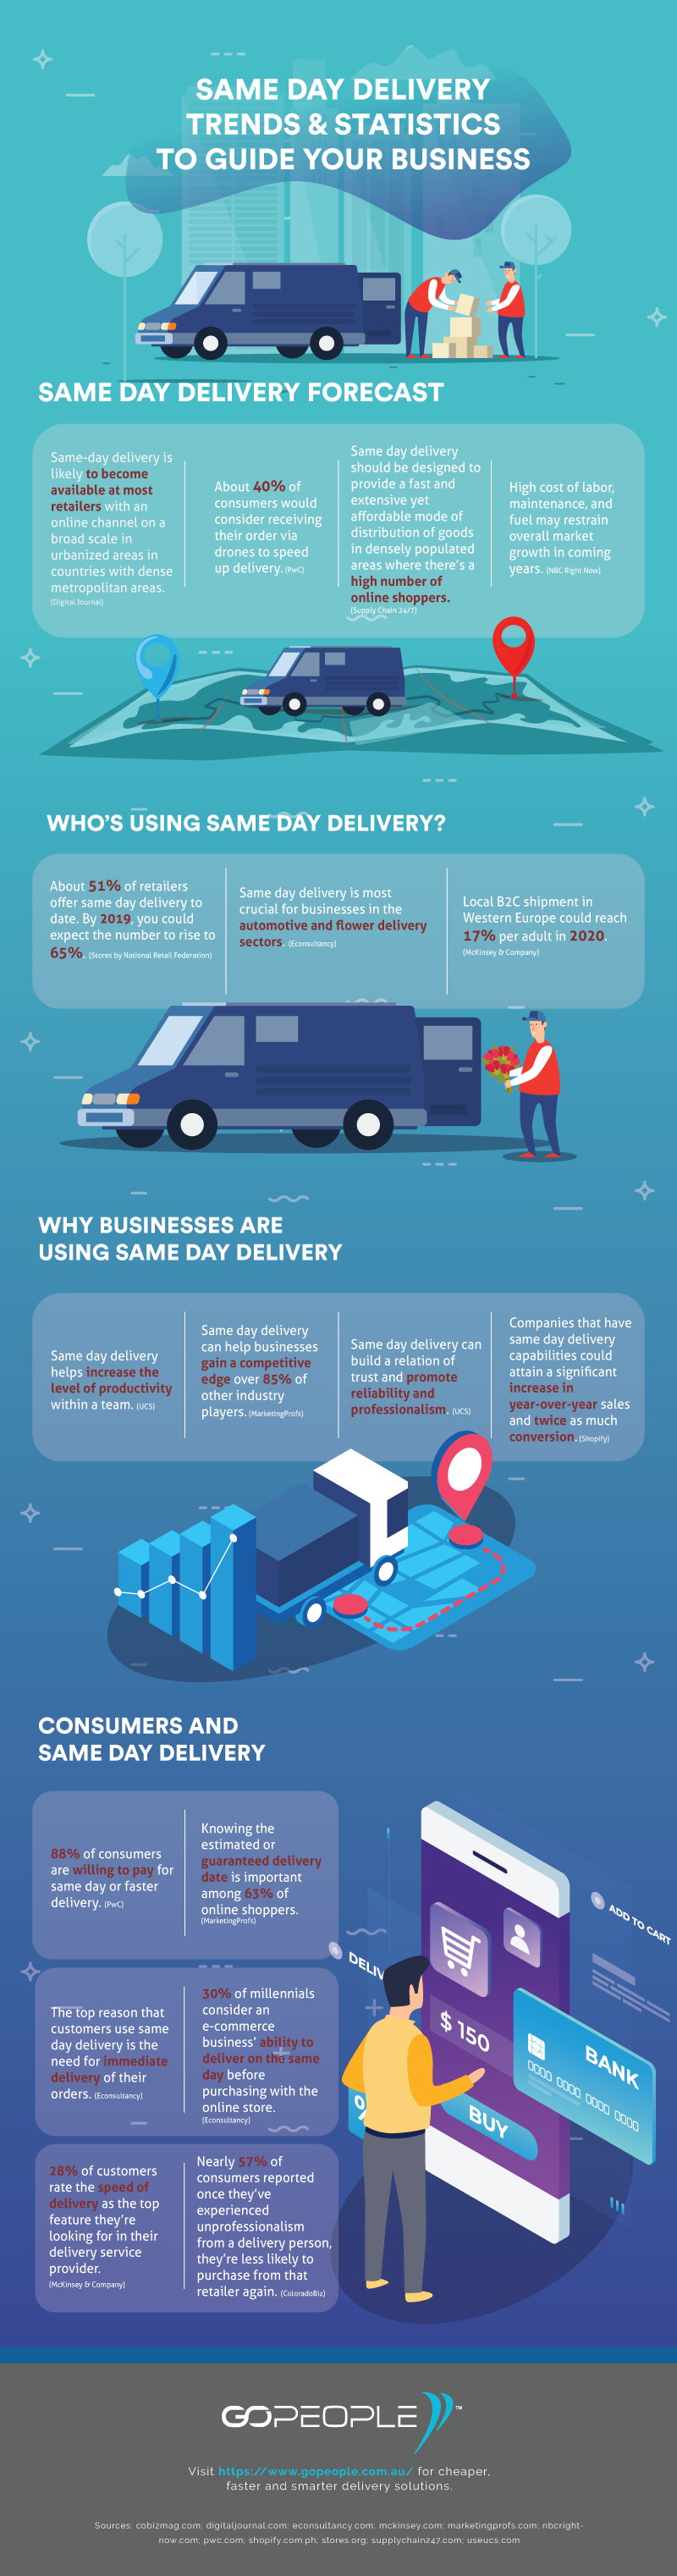 Same-Day-Delivery-Trends-and-Statistics-to-Guide-Your-Business-Infographic-plaza